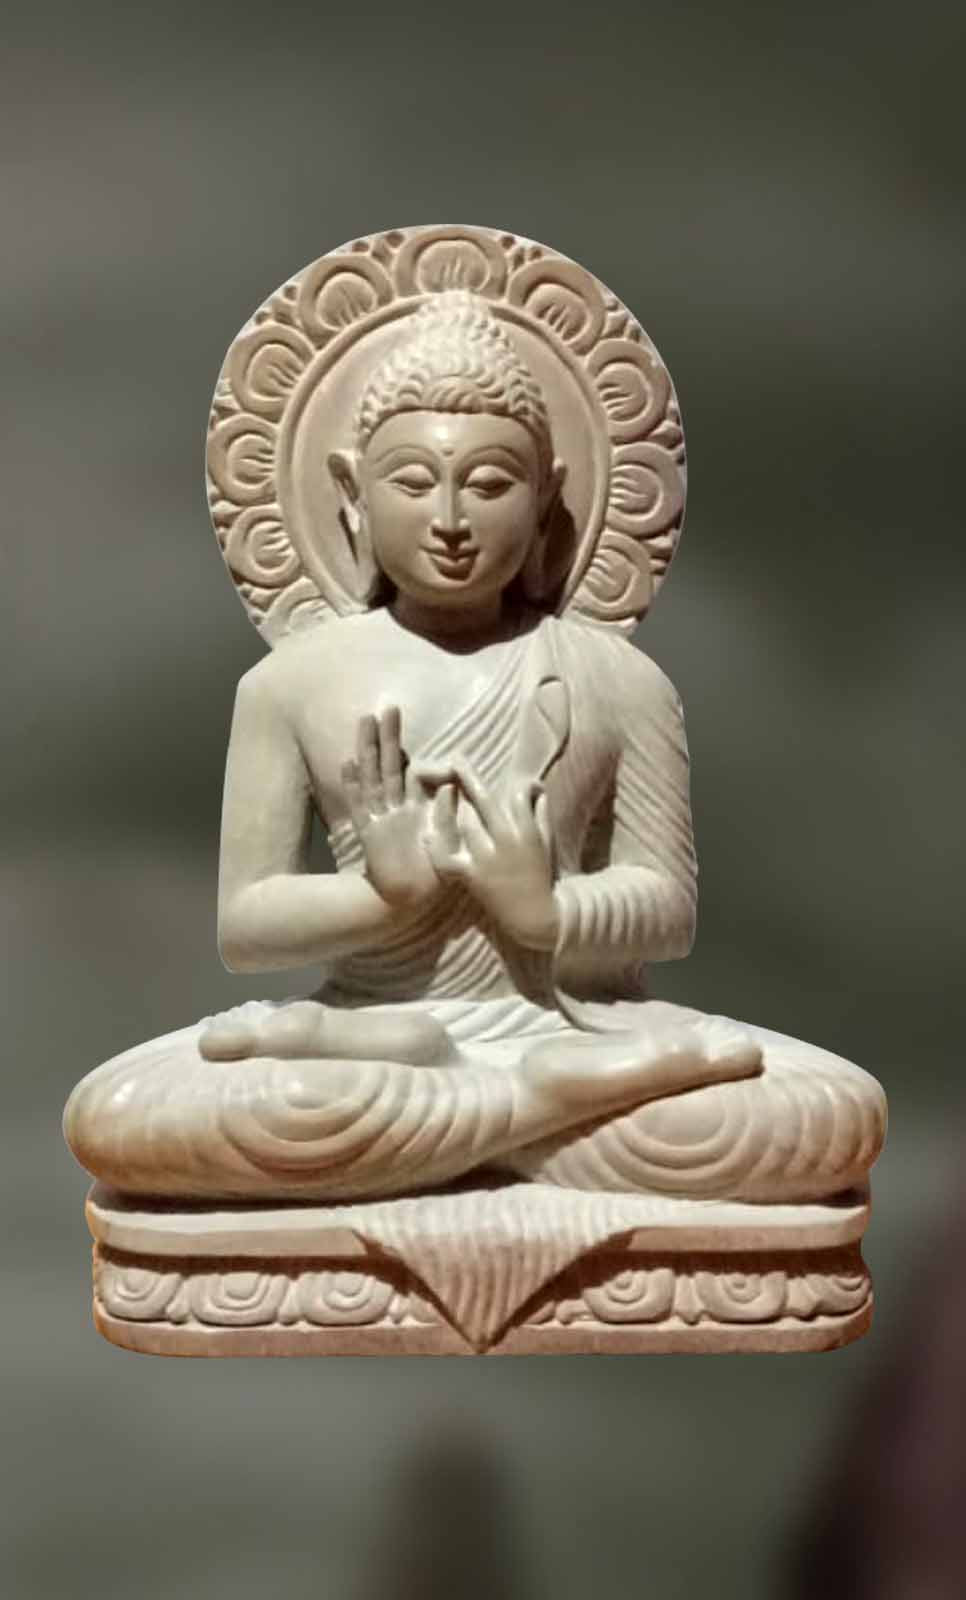 Lord Buddha: In Complete Peace - Artisans Crest